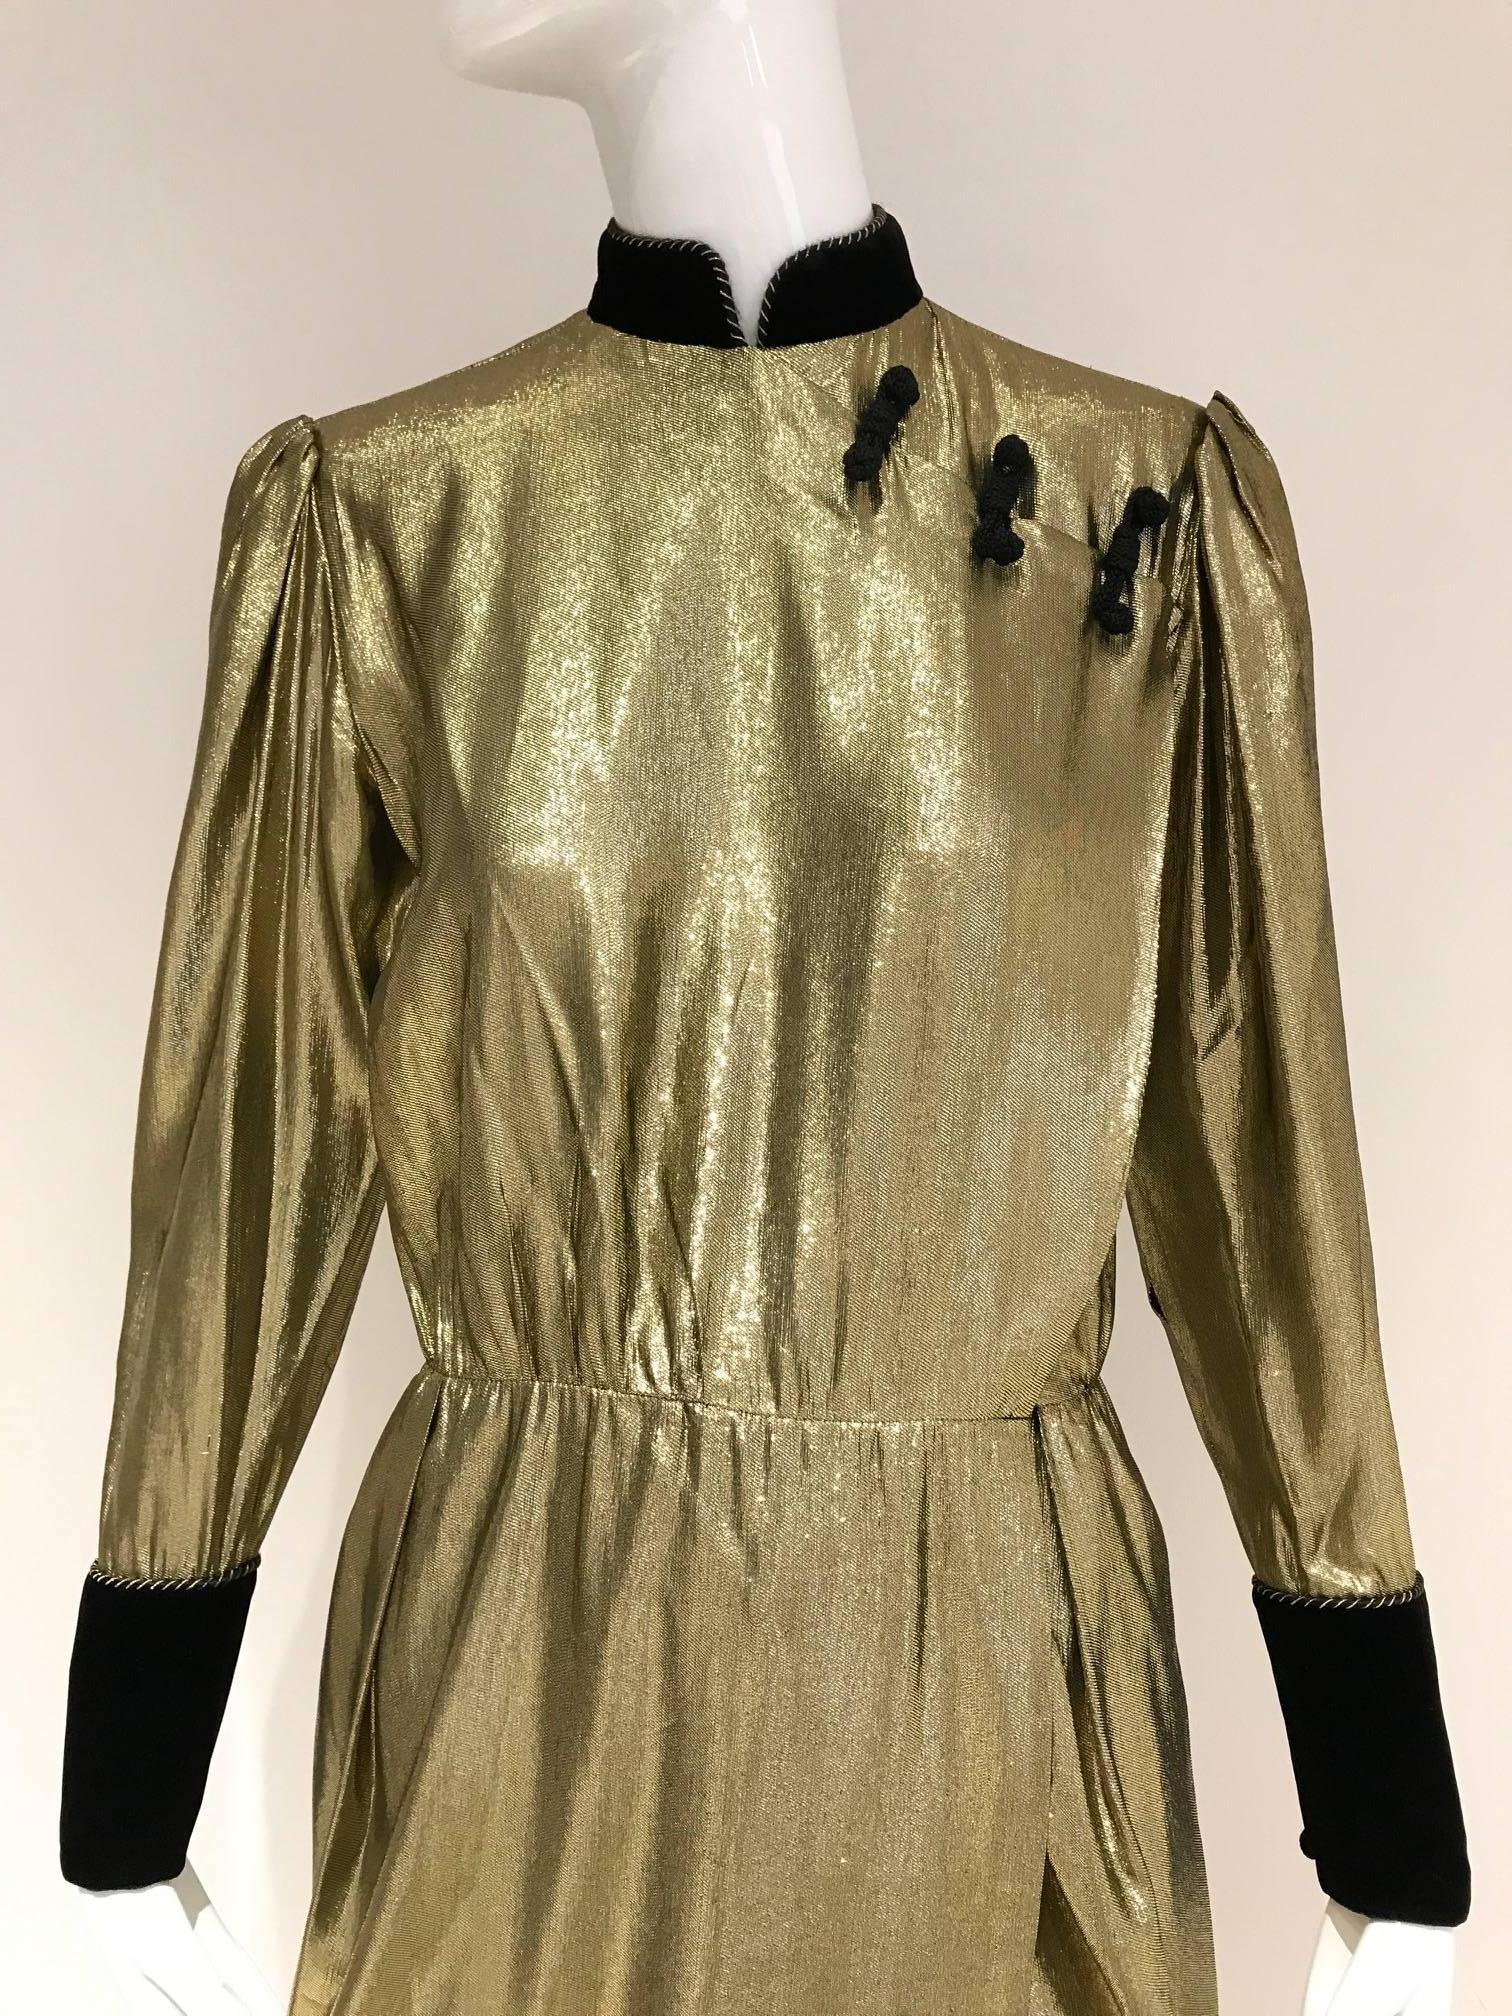 Chic 1980s Christian Dior gold lamé cheongsam inspired wrap  dress with black velvet cuff and frog fastener.  Fit size 2/4
Bust: 38 inches / Waist 26 inches/ Hip 38 inches/ Length: 56 inches.
Sleeve 23 inches